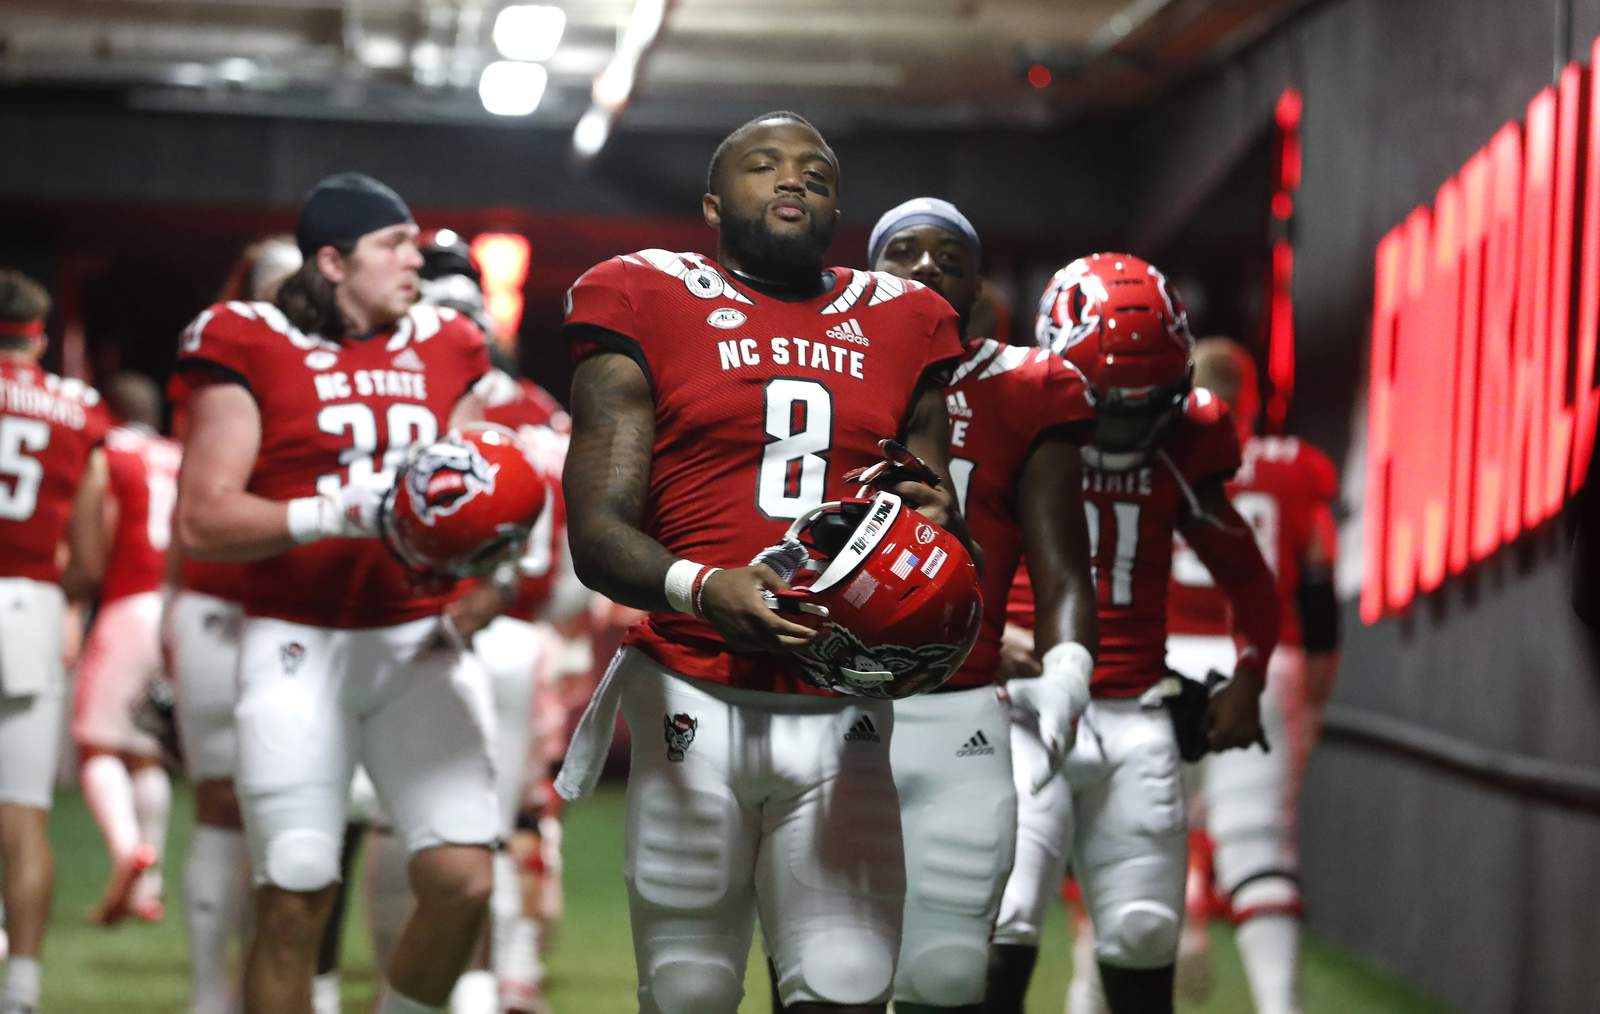 NC State seething in underdog role vs Kentucky in Gator Bowl